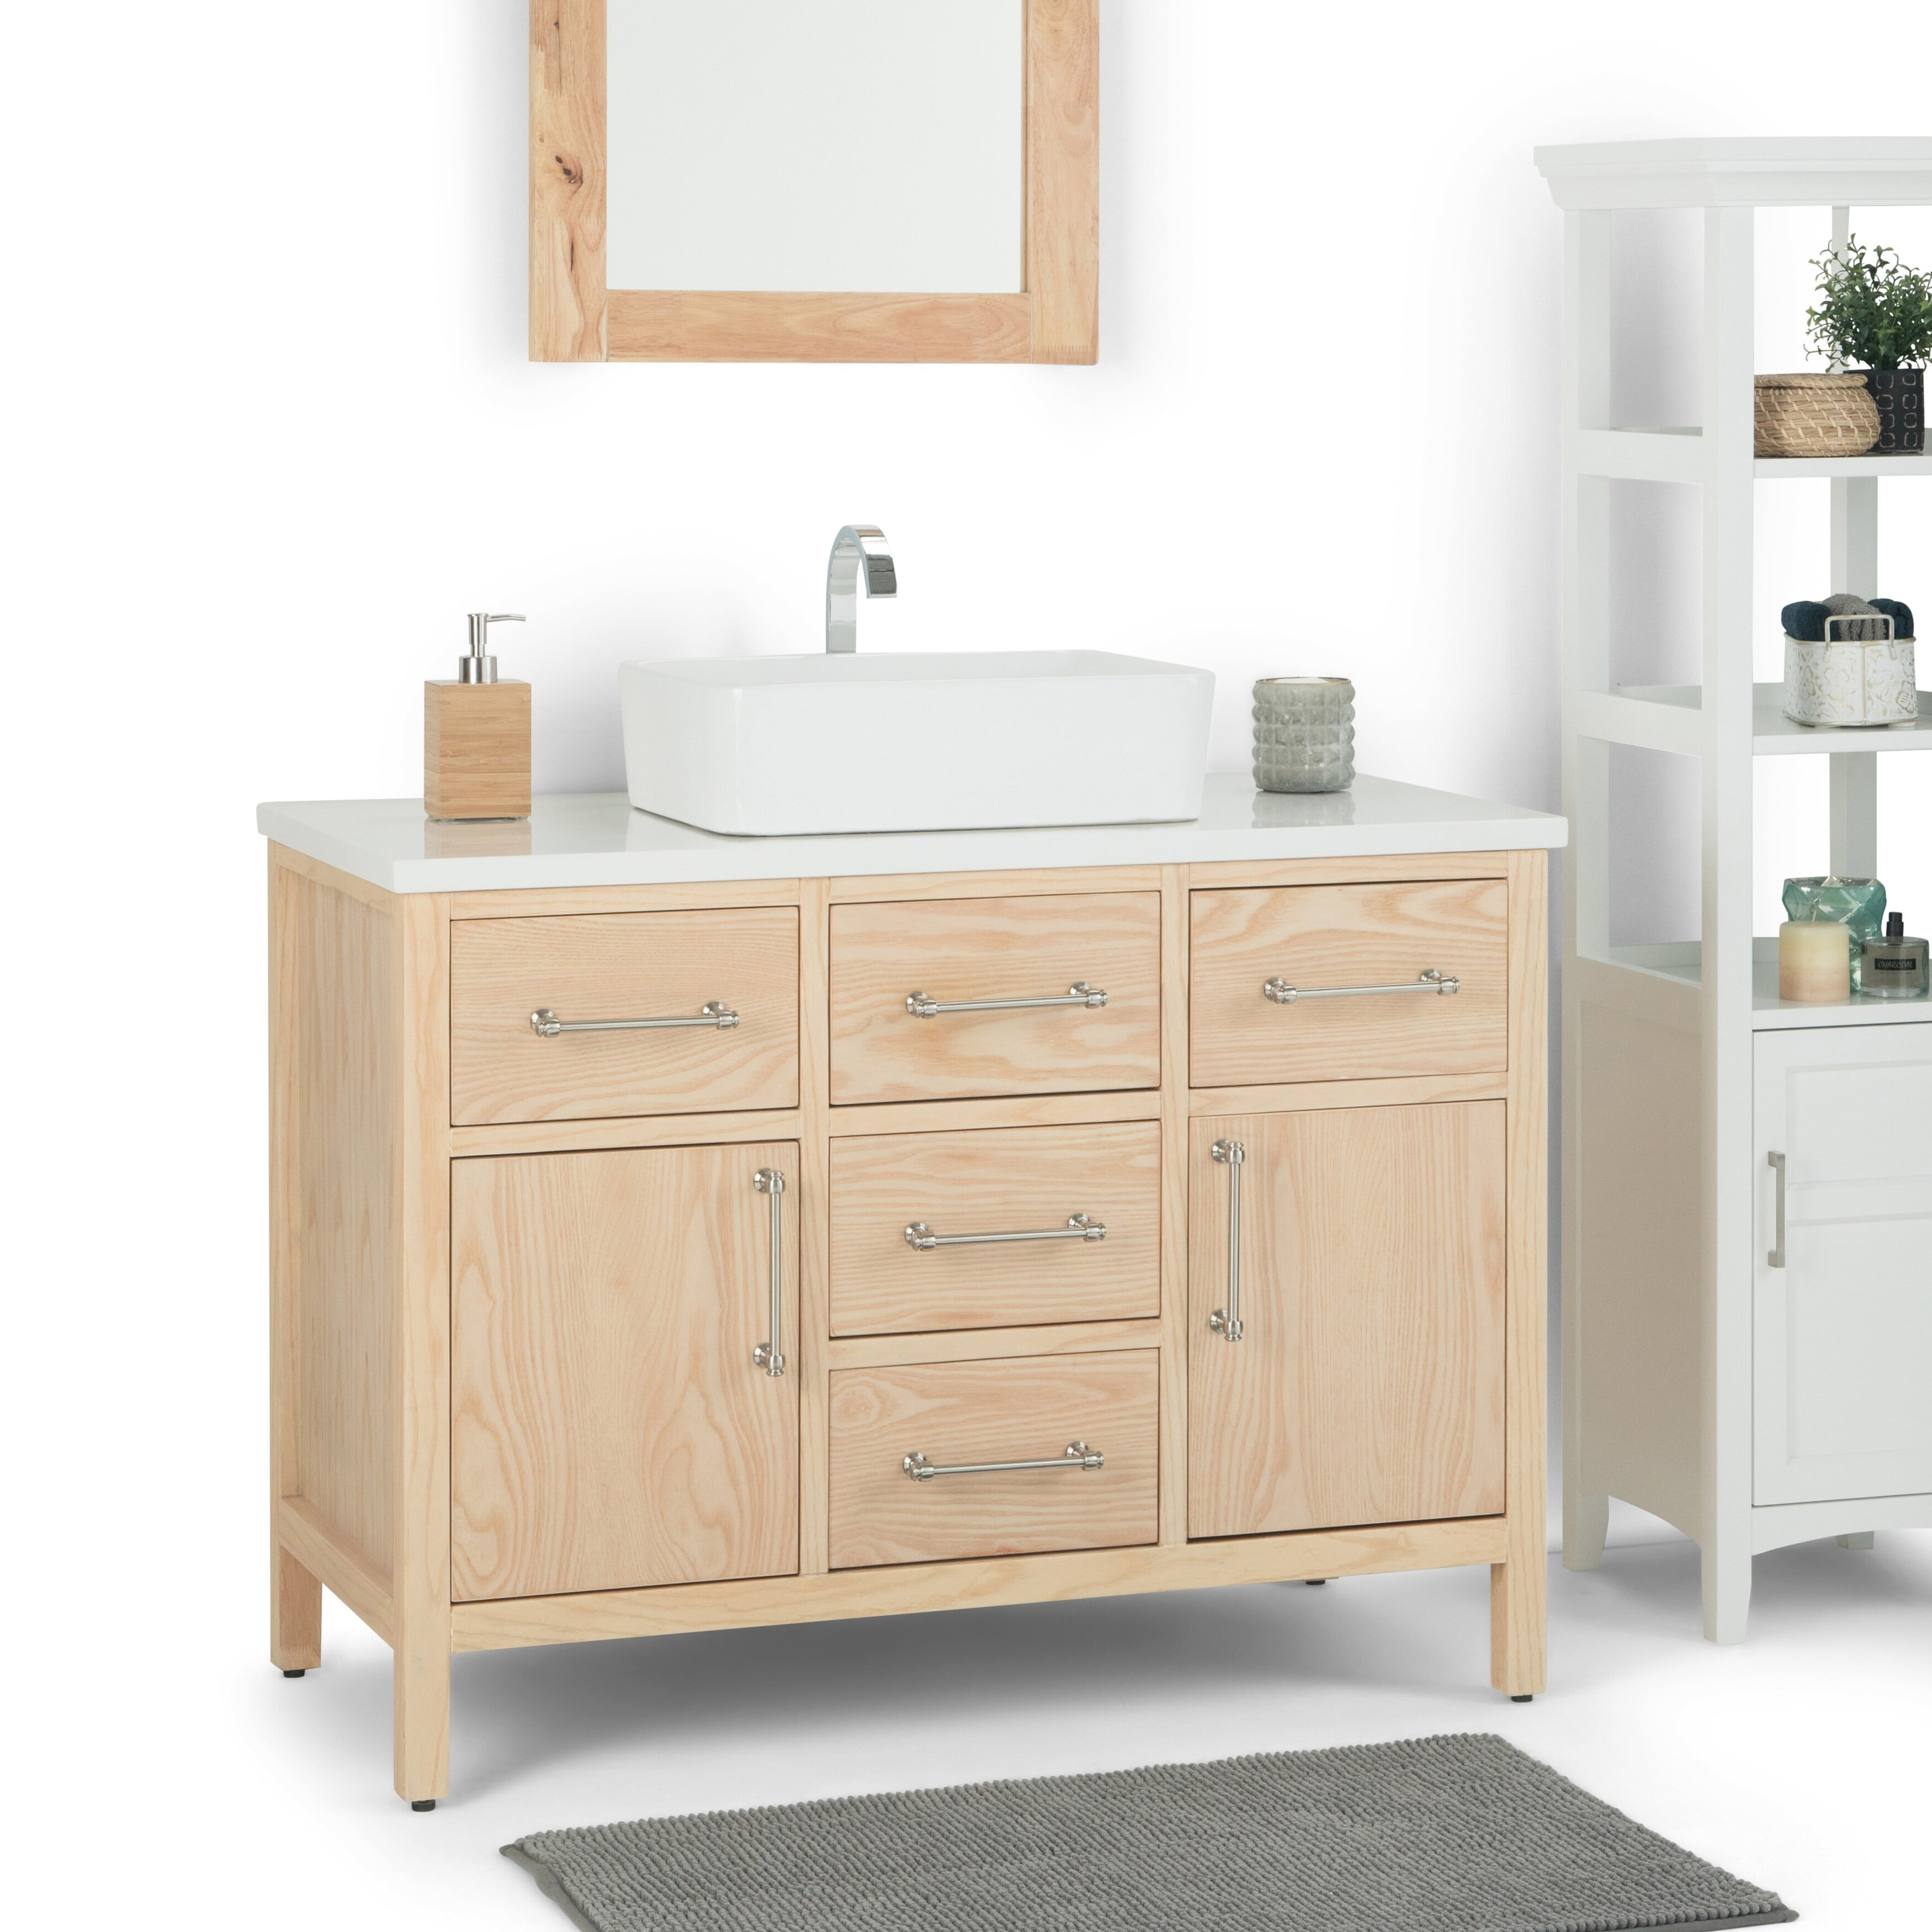 Wyndenhall Farley 42 Inch Contemporary, Bathroom Vanities With Tops 42 Inches